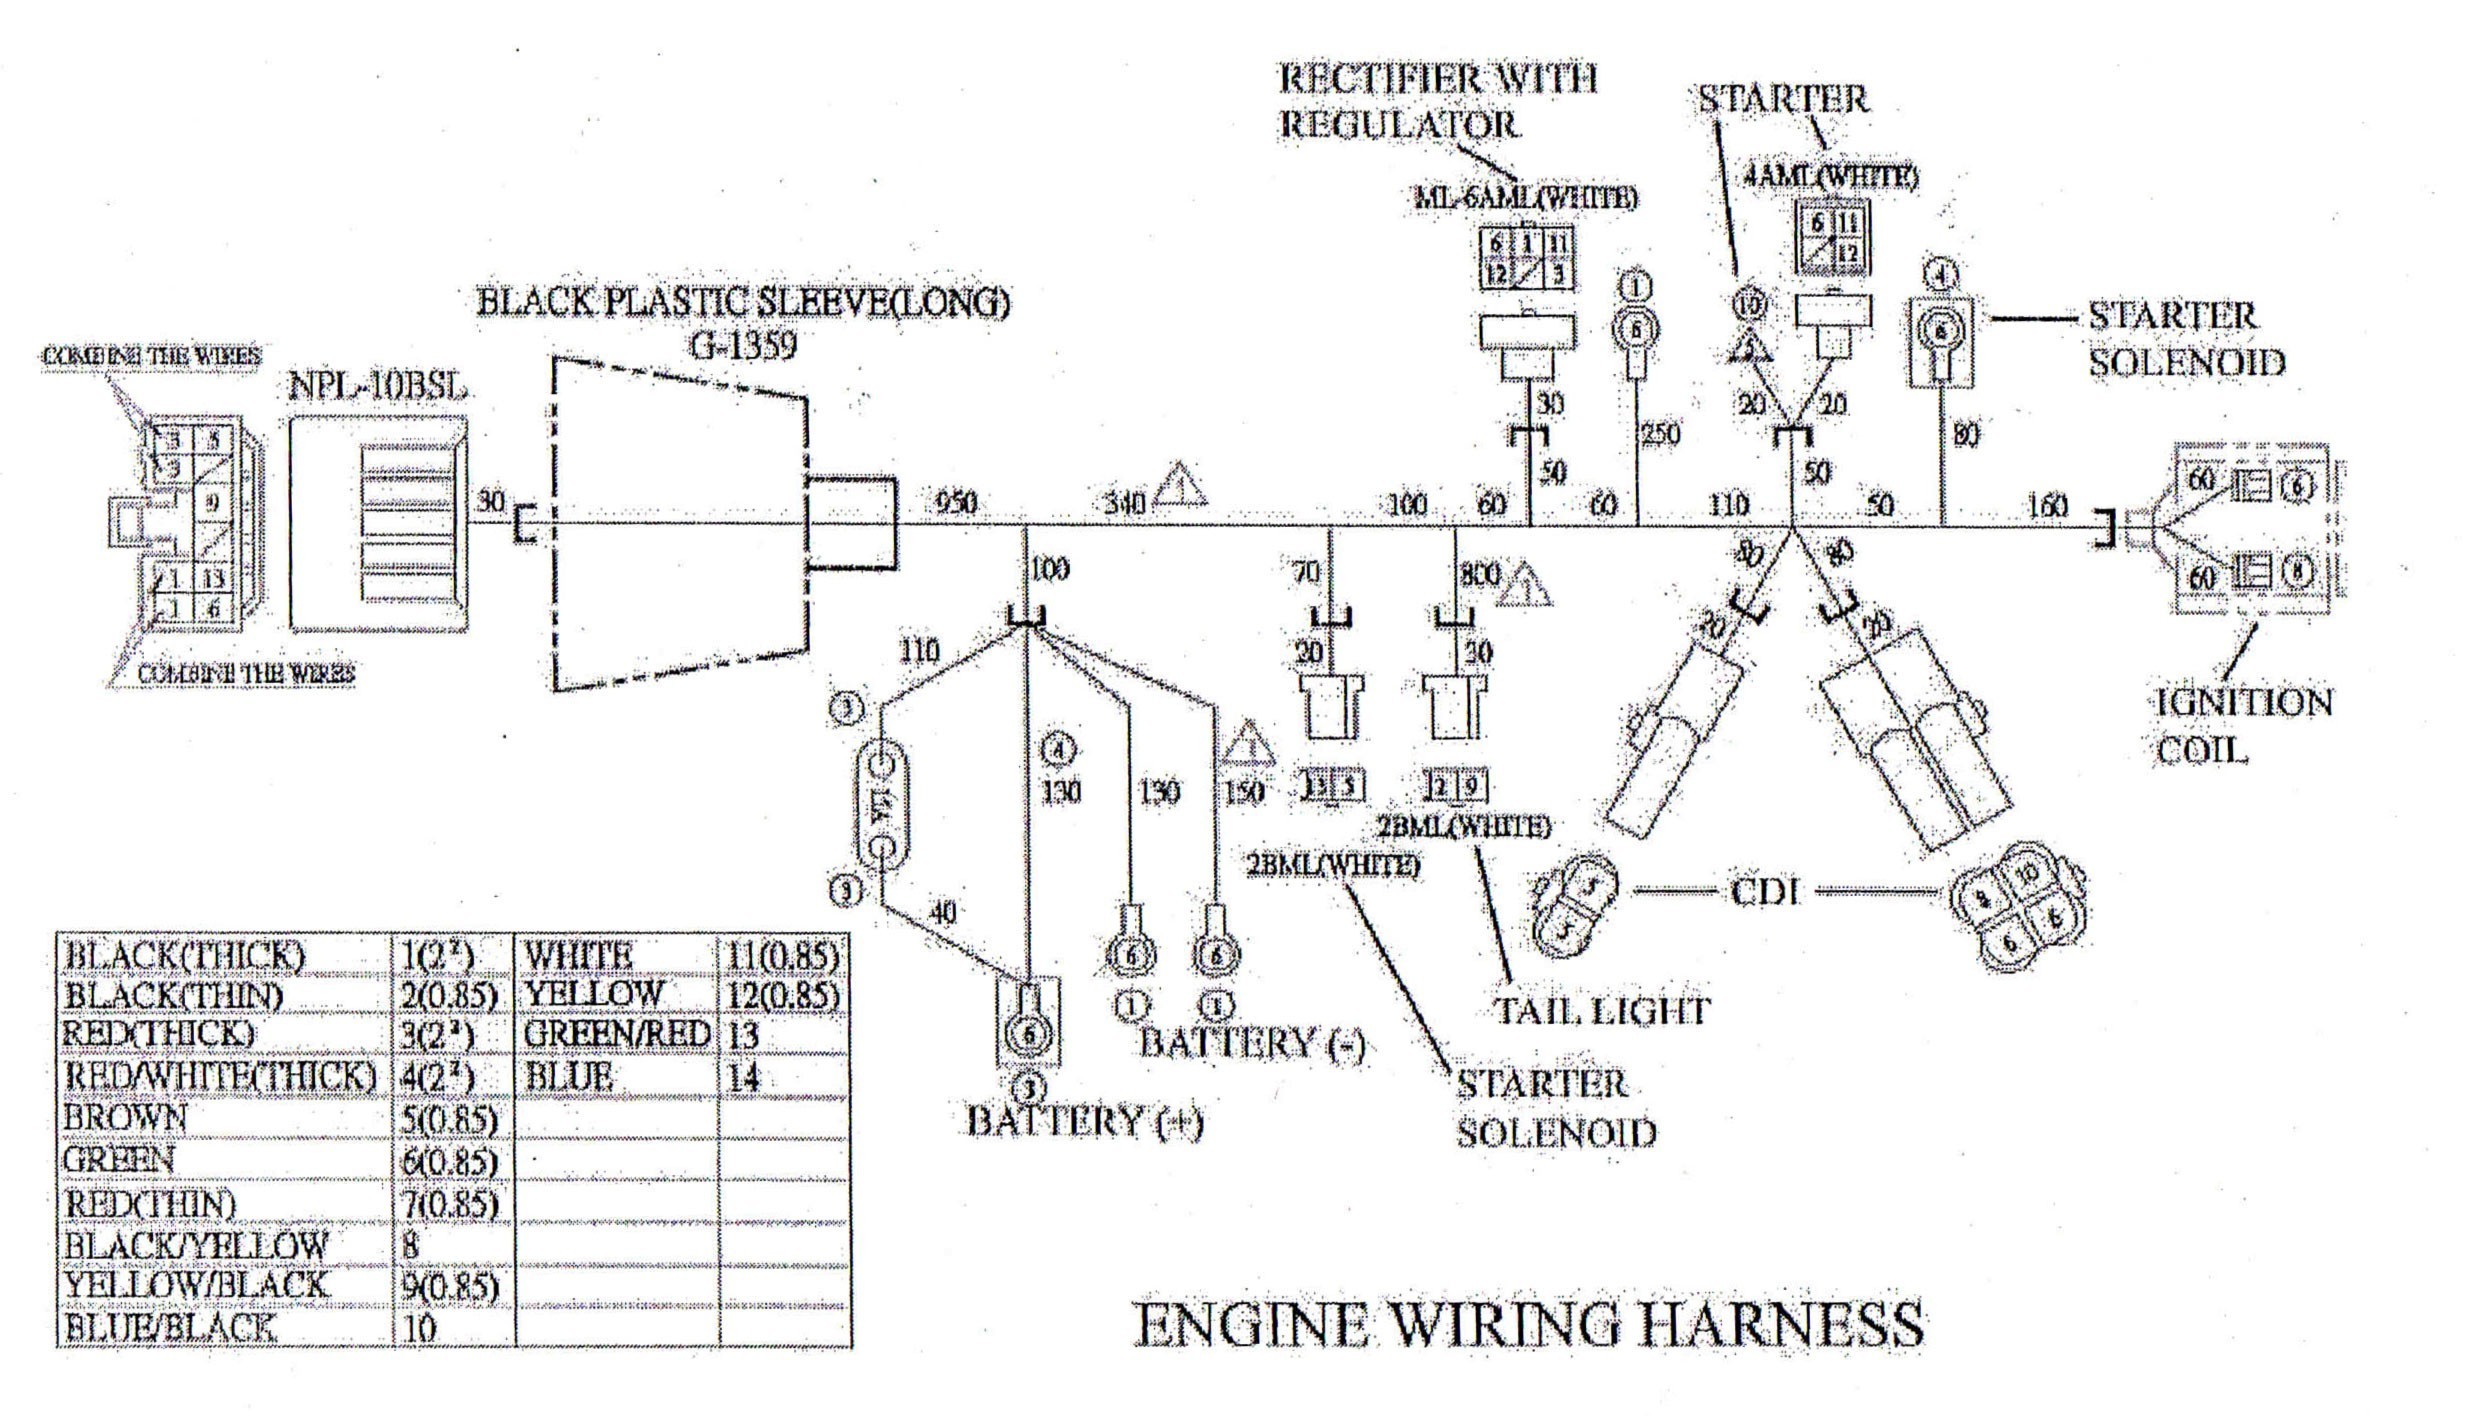 Basic Ignition Wiring Diagram Awesome Ignition Wiring Diagram Diagram Basic Ignition Wiring Diagram Awesome Ignition